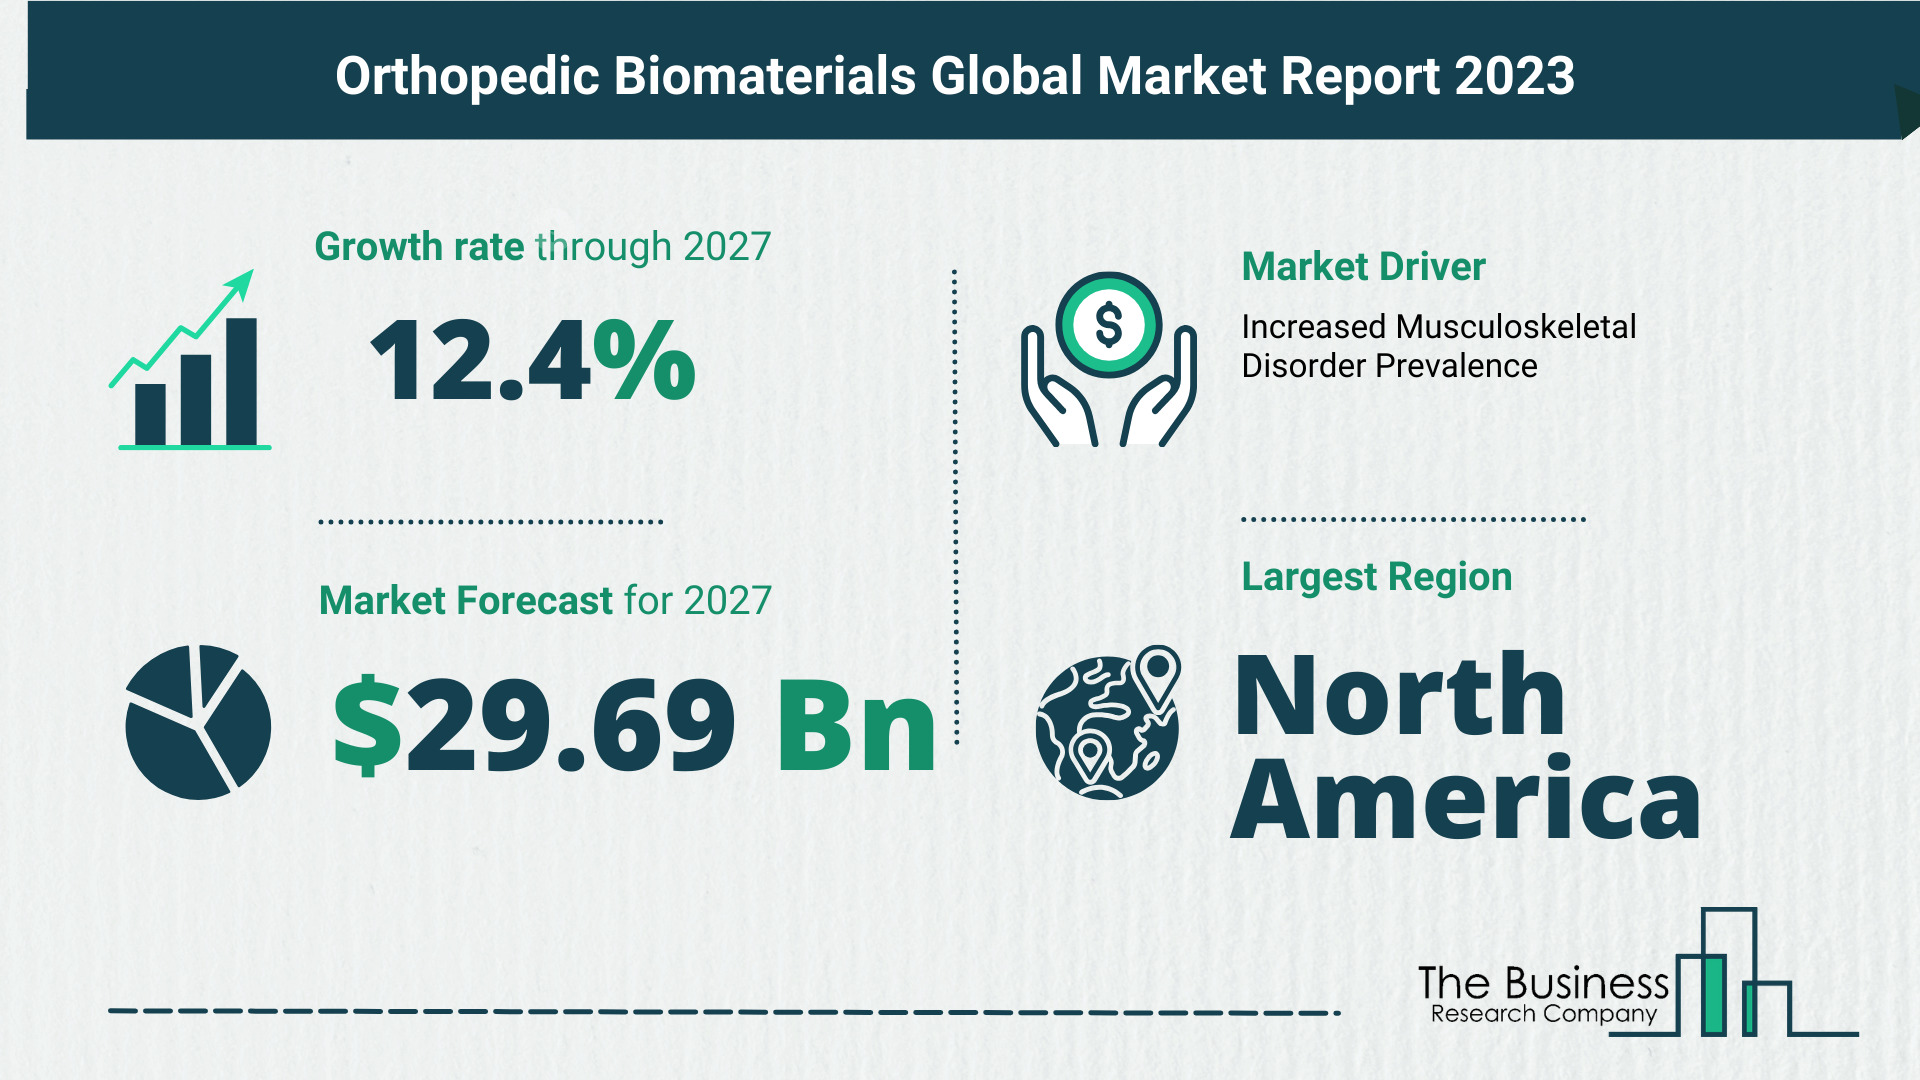 What Is The Forecast Growth Rate For The Orthopedic Biomaterials Market?